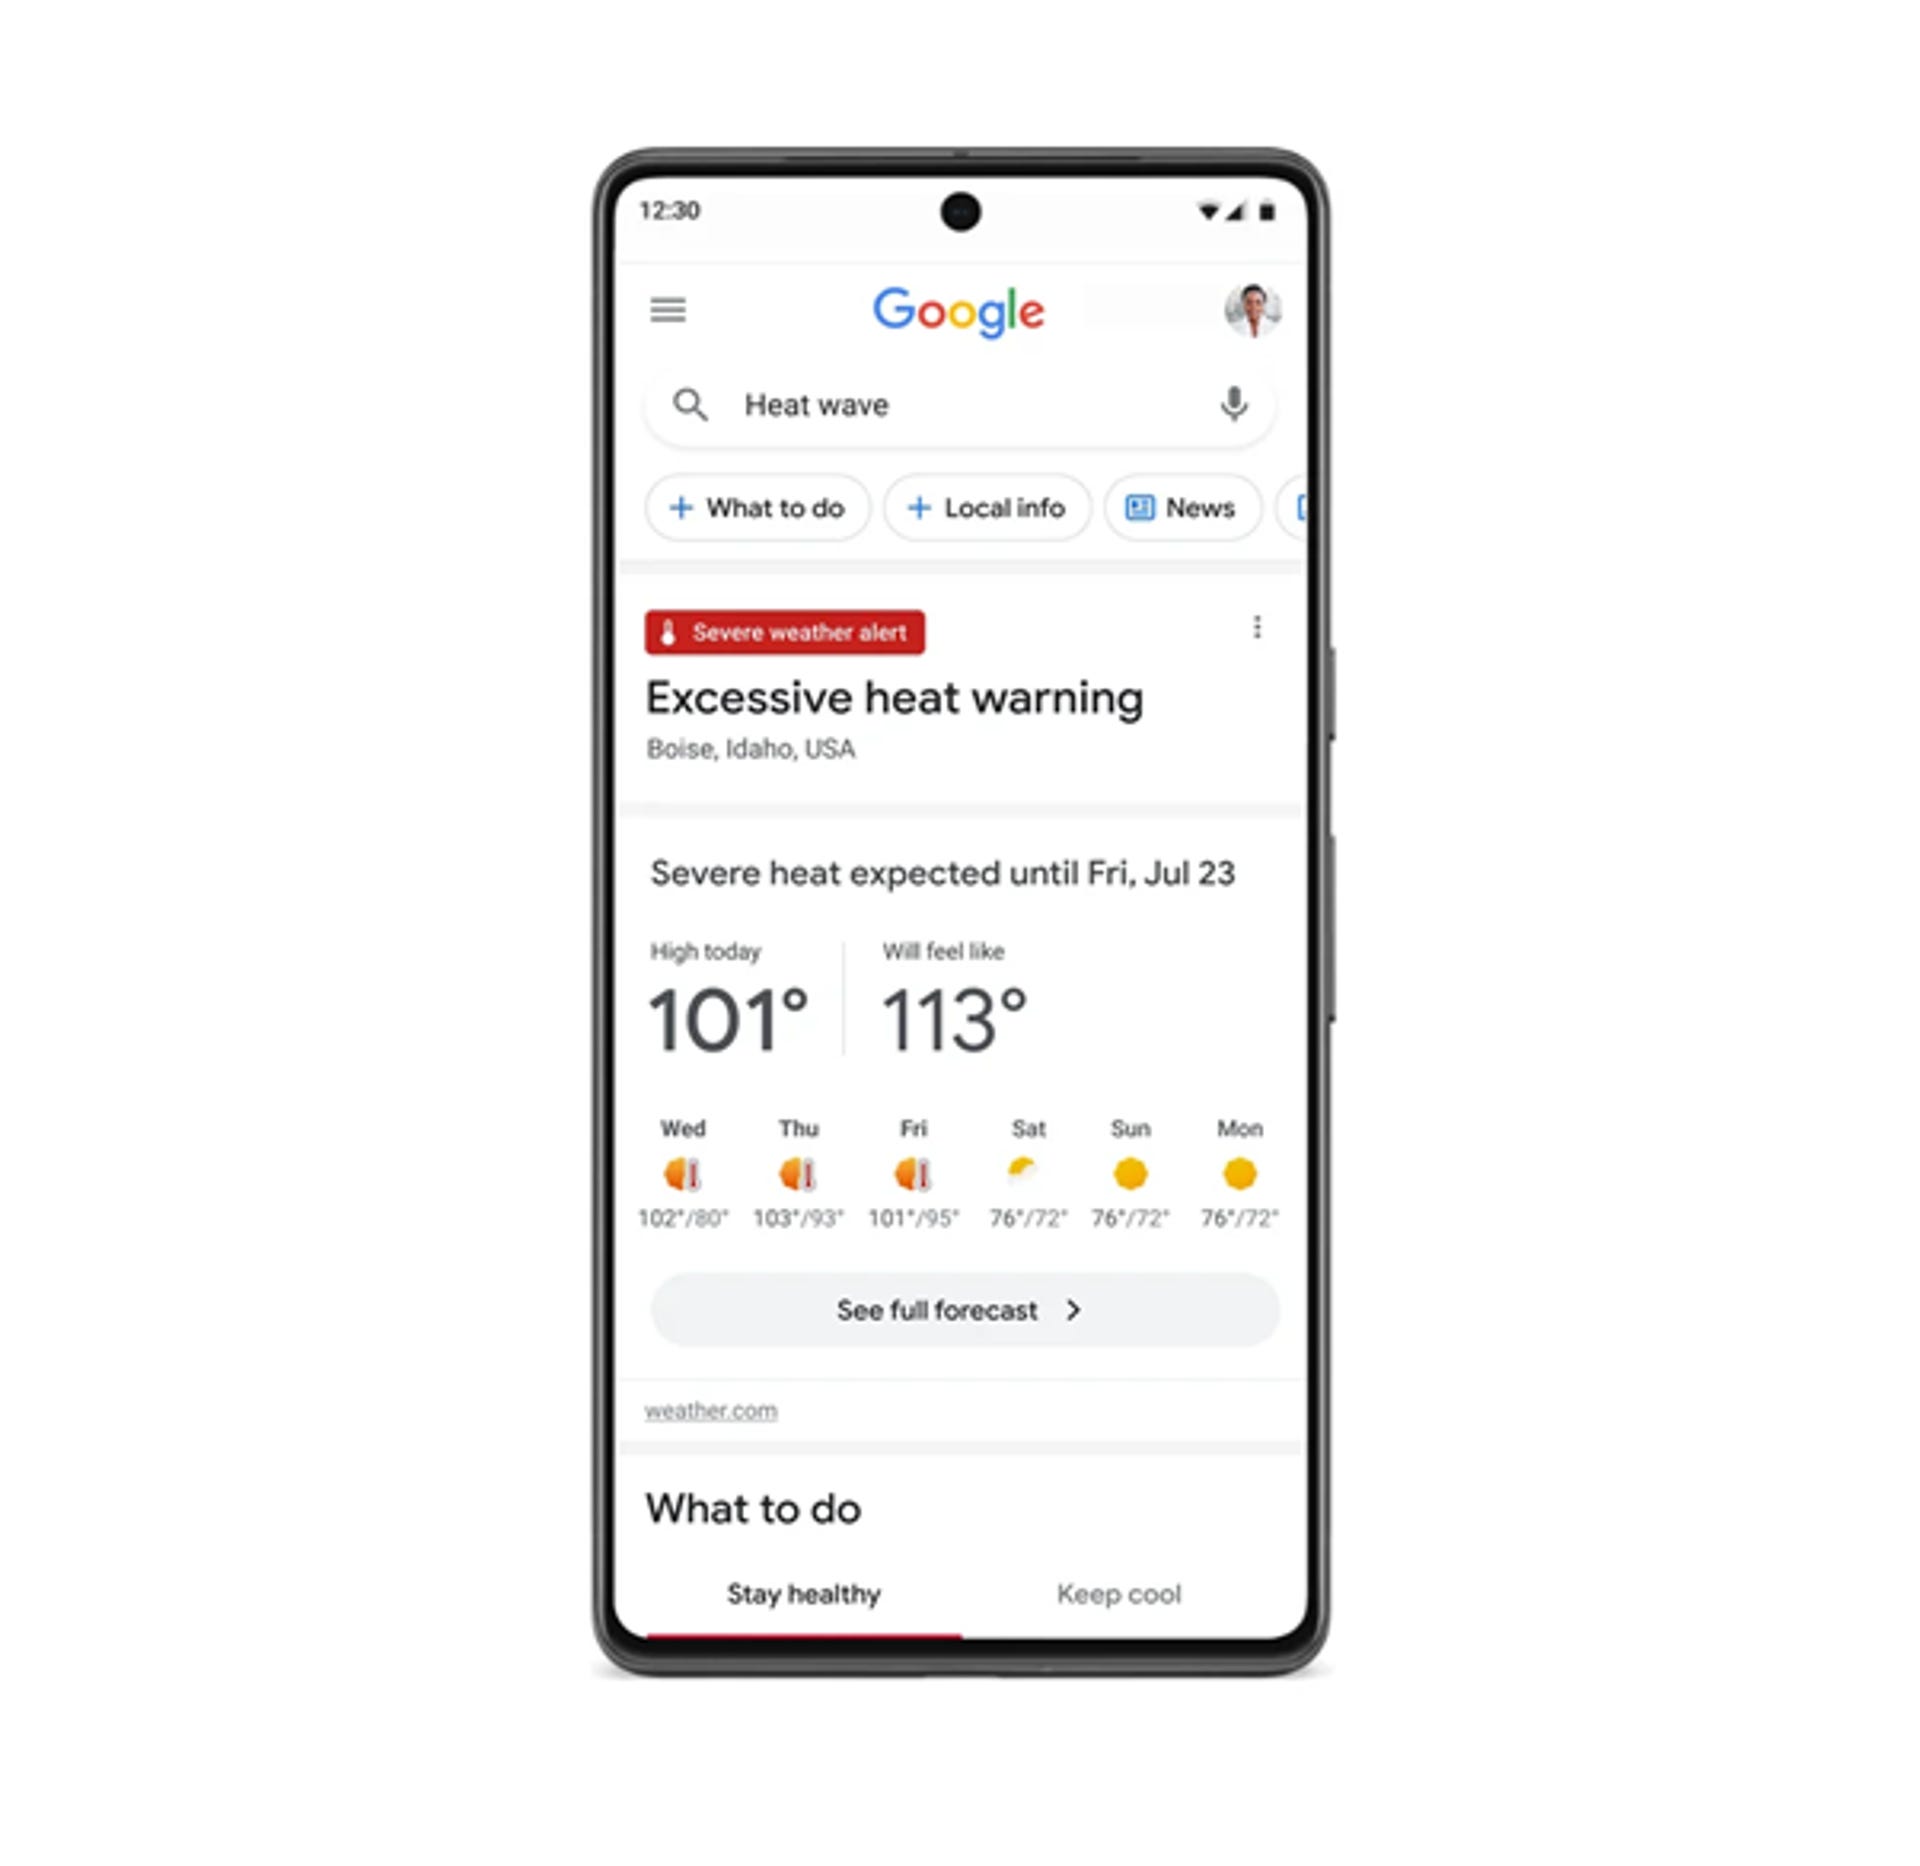 google search screen display showing severe weather alert for extreme heat